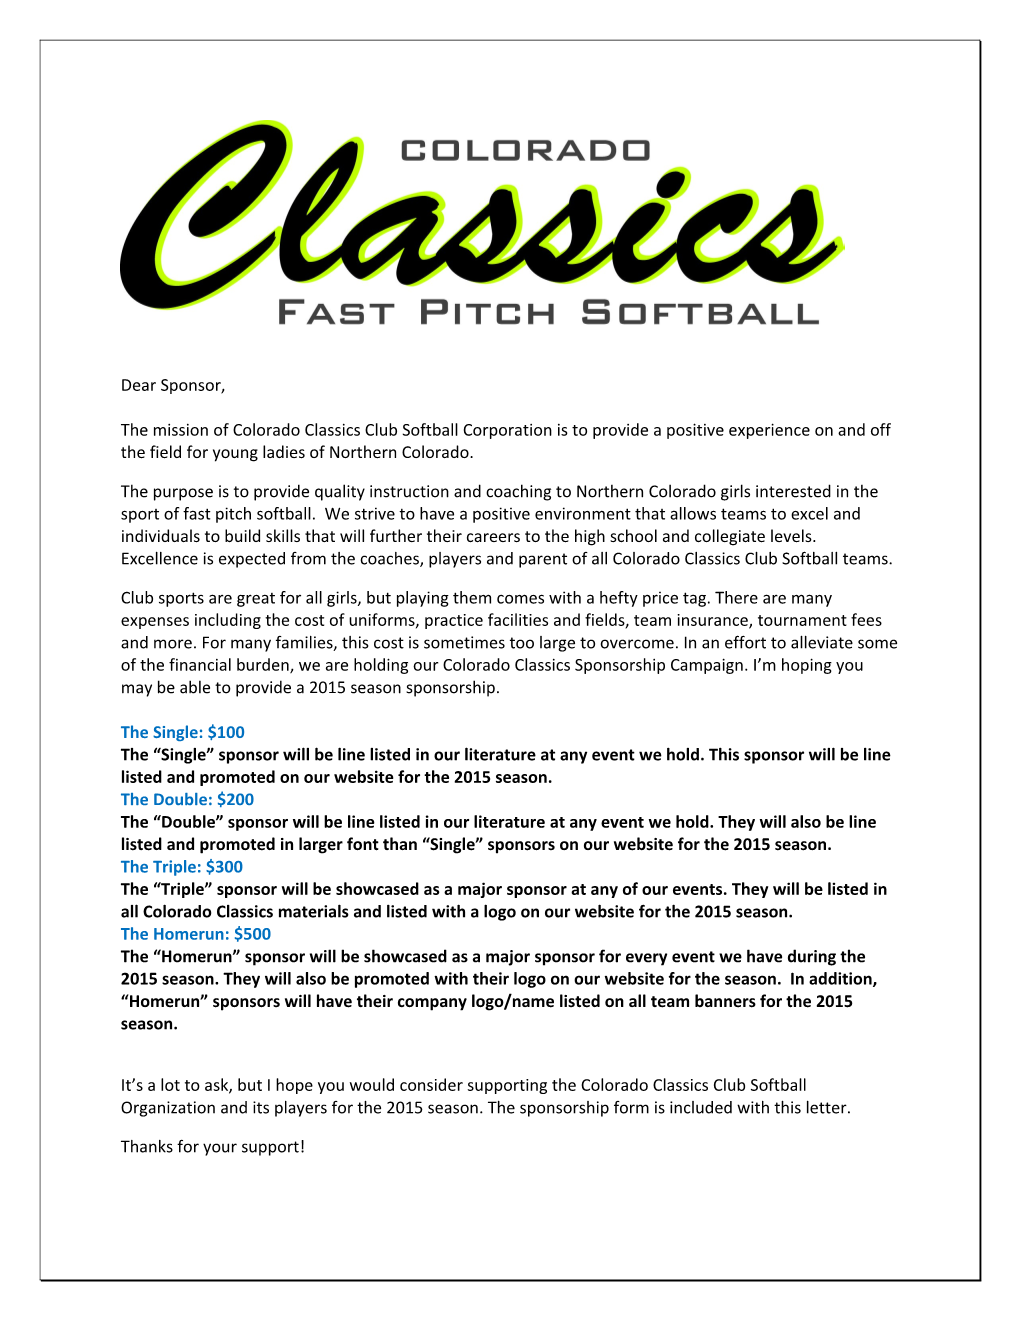 The Mission of Colorado Classics Club Softball Corporationis to Provide a Positive Experience